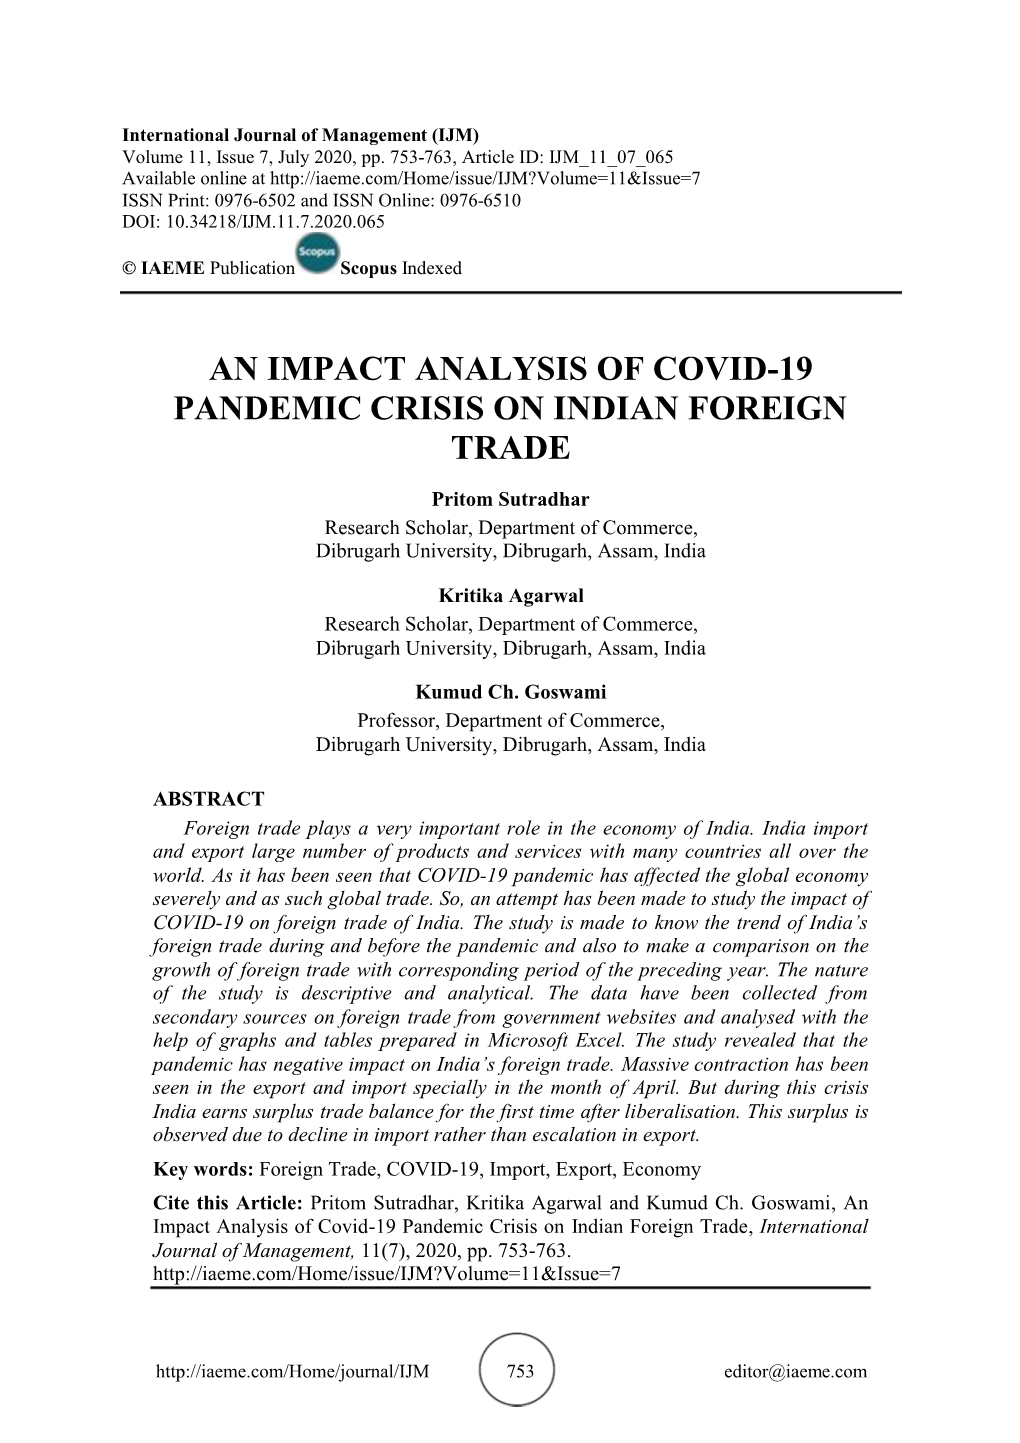 An Impact Analysis of Covid-19 Pandemic Crisis on Indian Foreign Trade